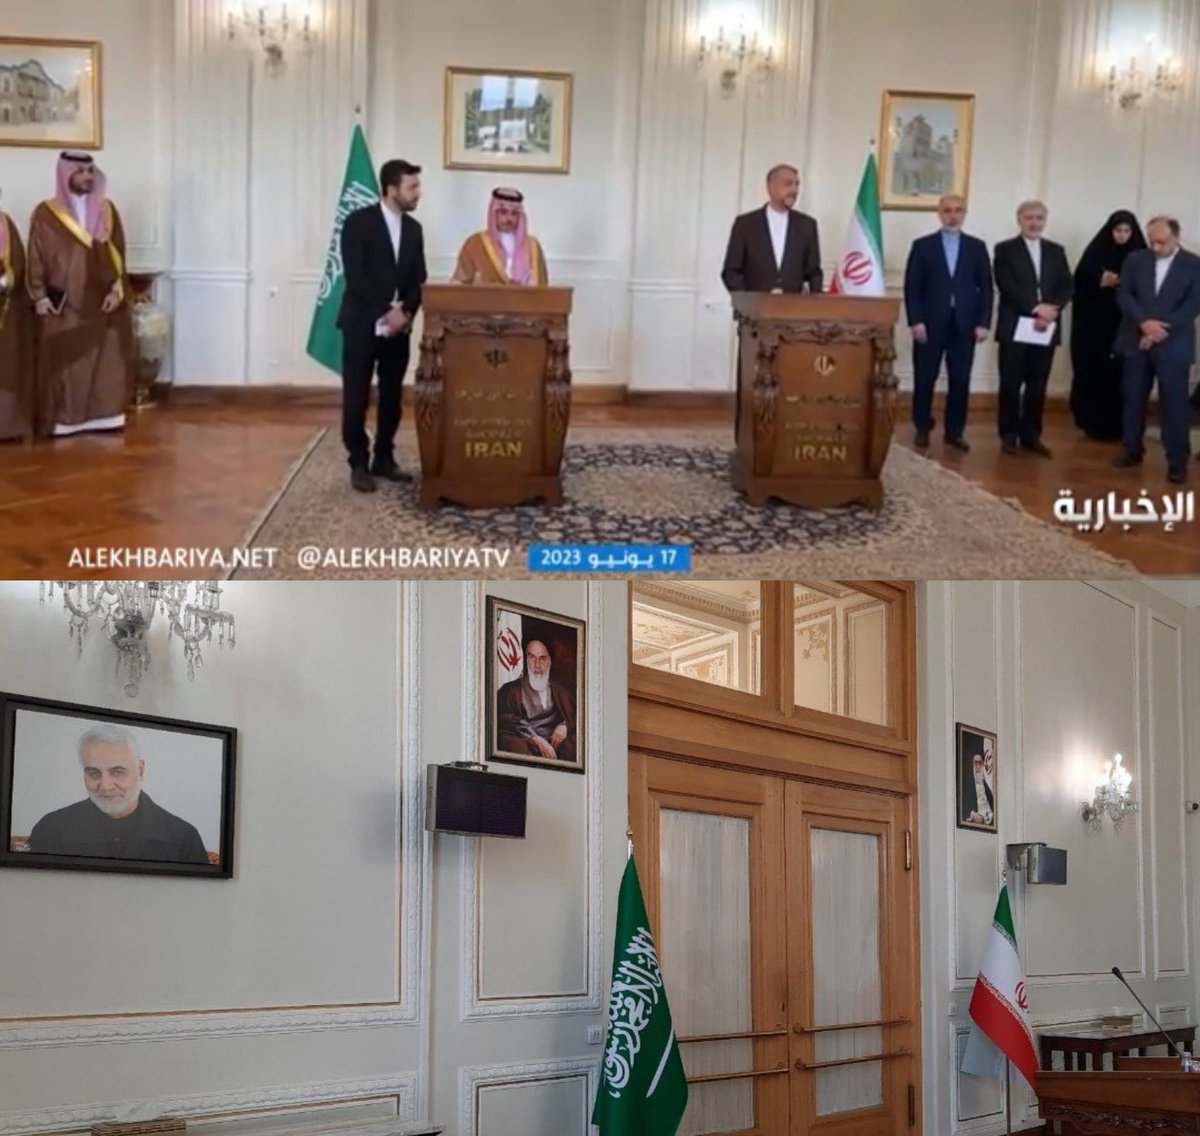 Interesting! 🇸🇦🇮🇷

It’s reported that the office of #Saudi FM objected to the location of the press conference between the Saudi minister and his #Iranian counterpart in #Tehran because of the presence of a picture of #Soleimani. The conference location was ultimately changed.